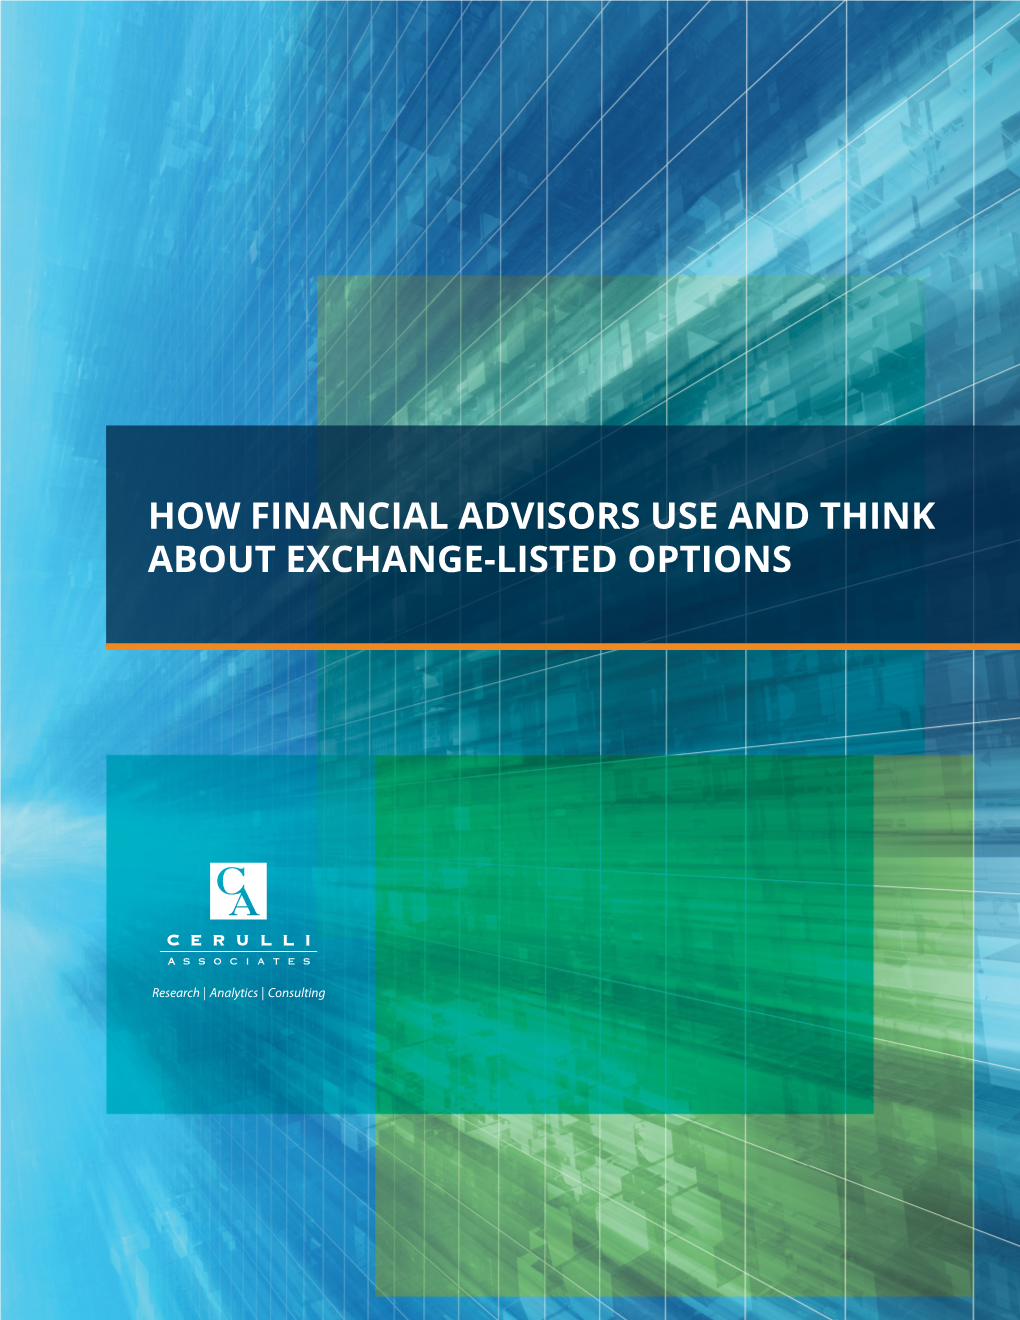 How Financial Advisors Use and Think About Exchange-Listed Options